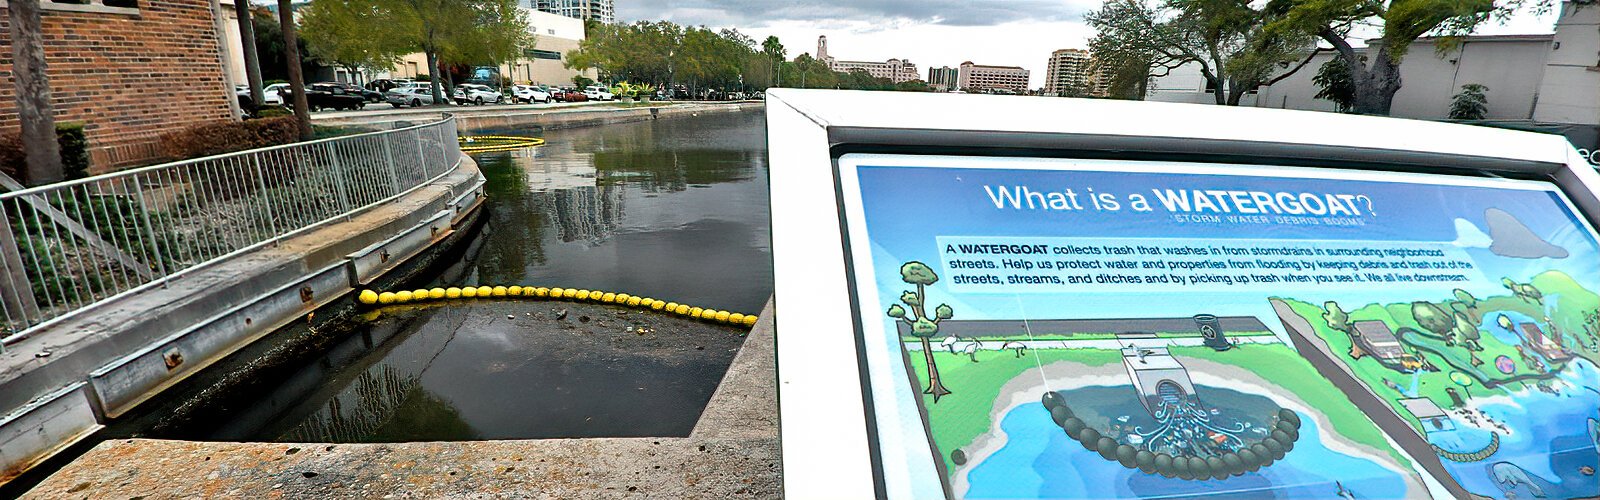 As explained and illustrated on the sign, the St. Petersburg Municipal Marina is kept clean by Watergoats, which prevent rash washed in from storm drains to pollute it.